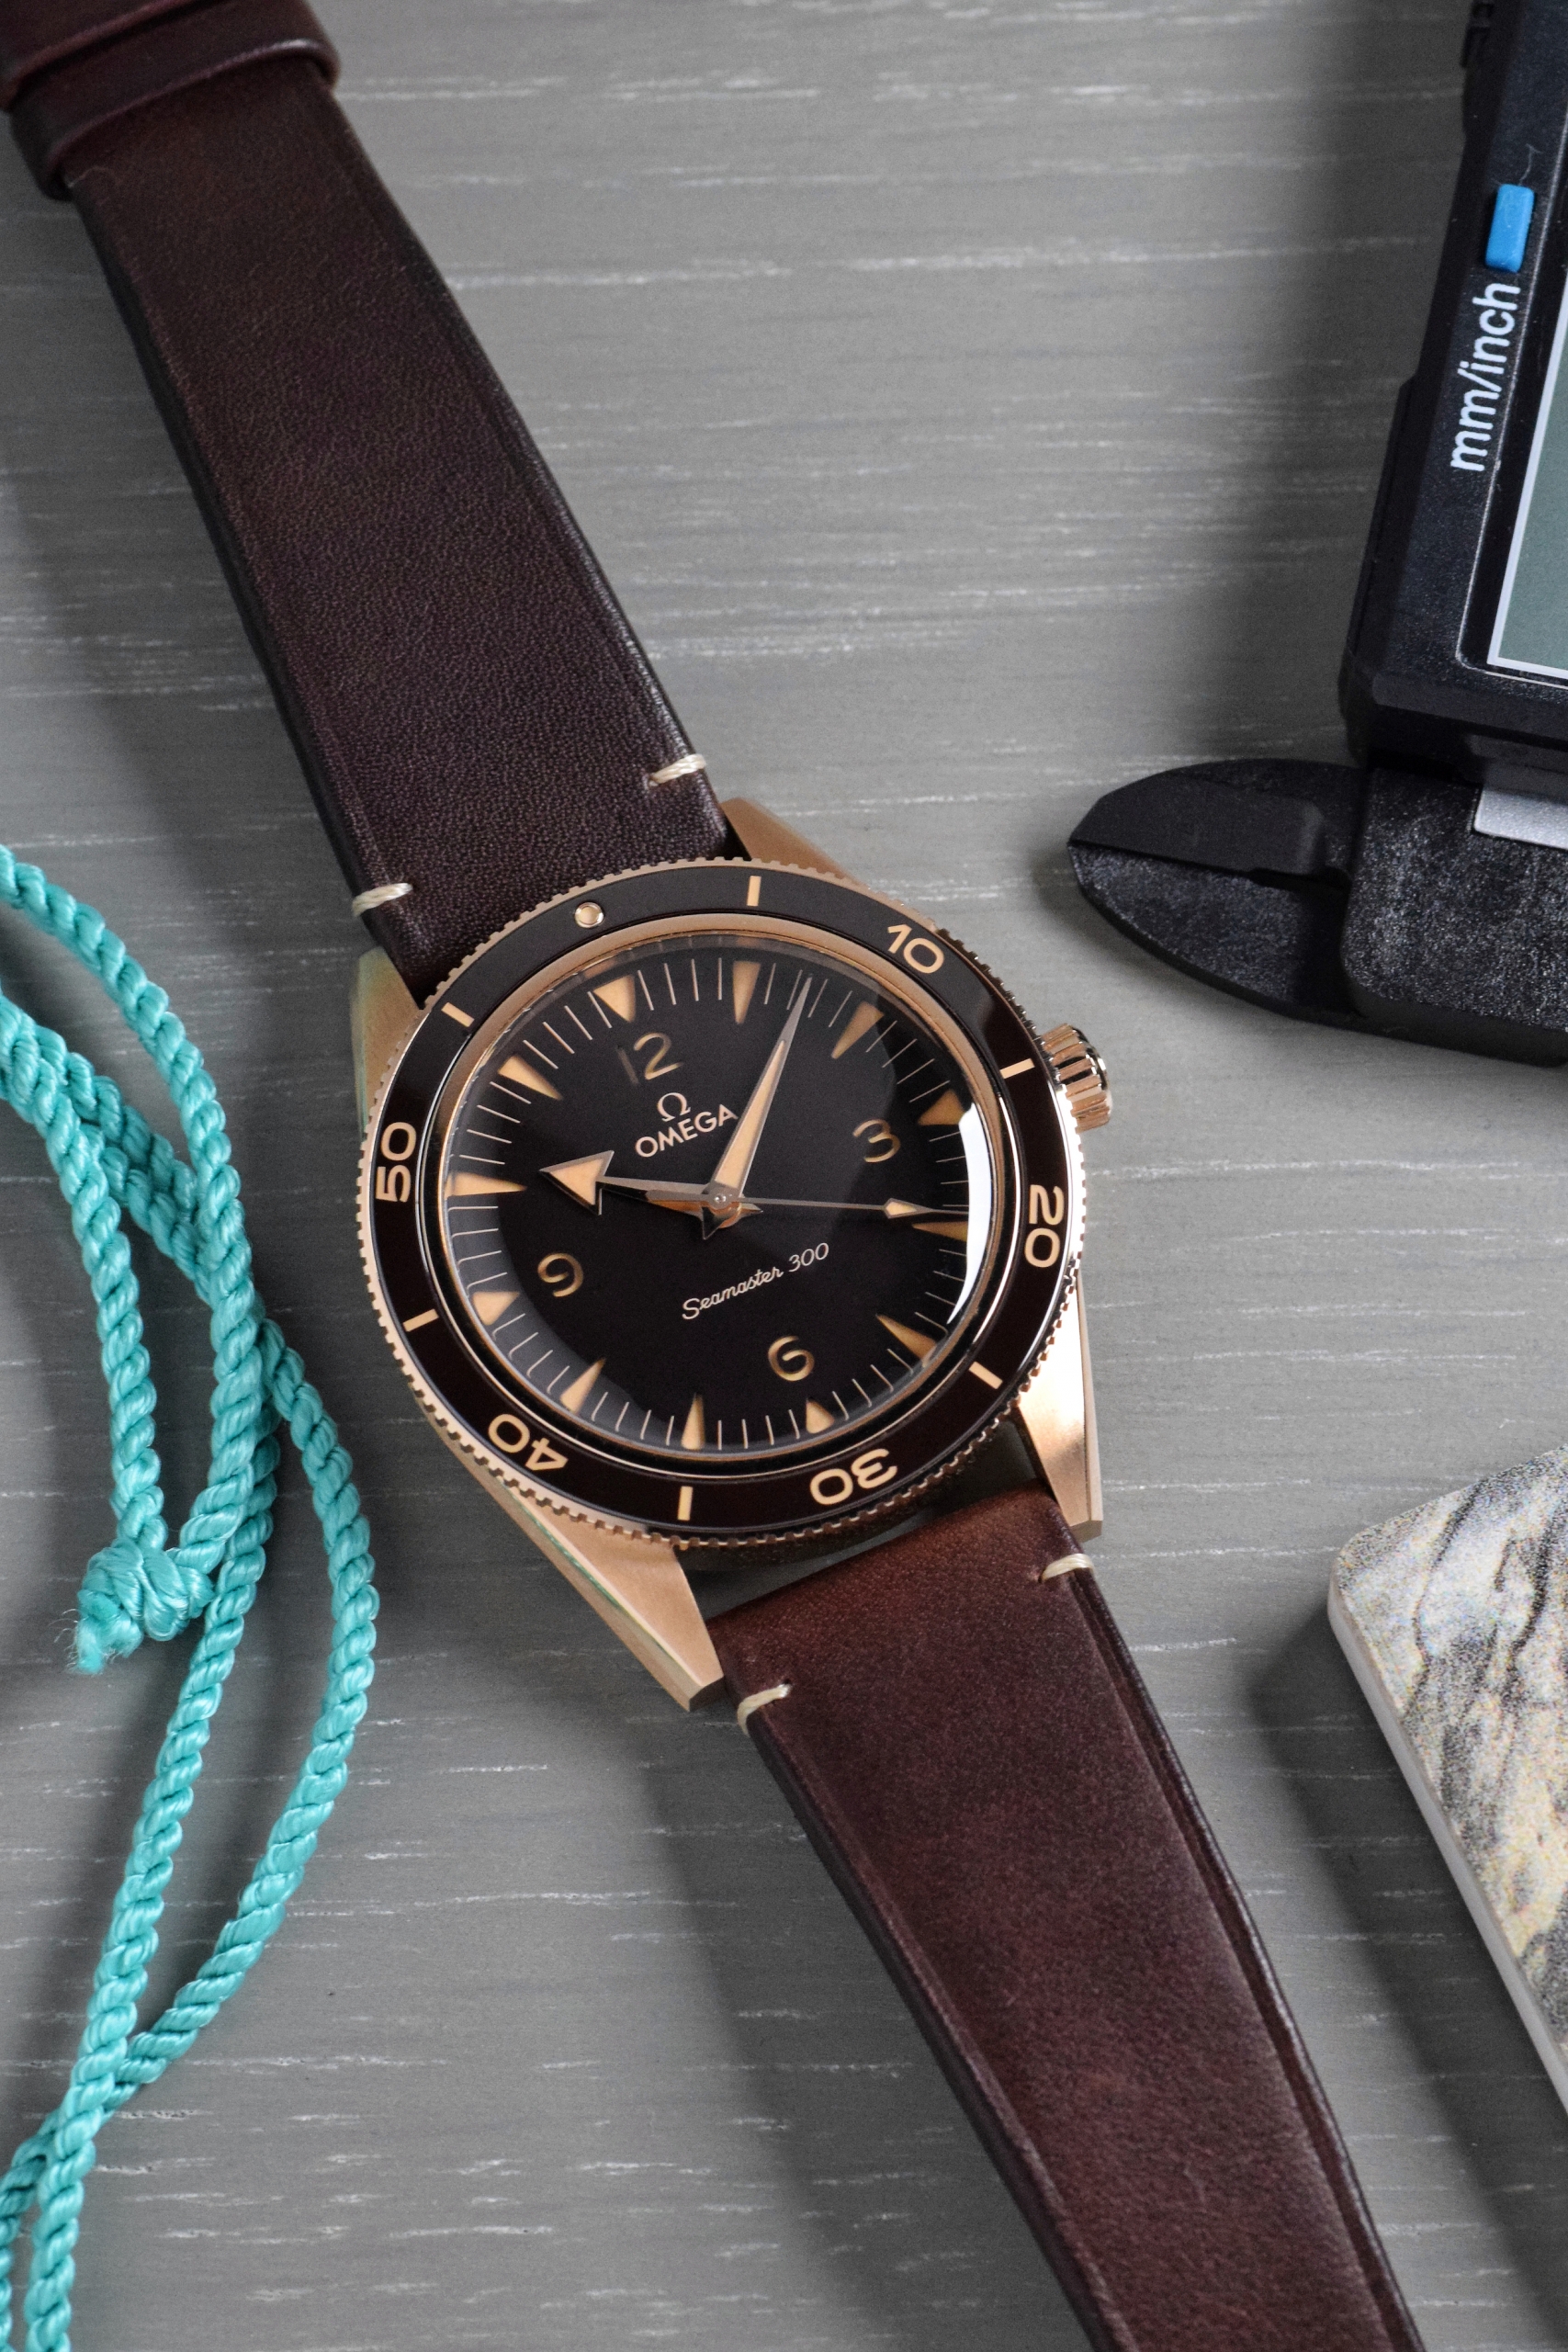 omega watches gold